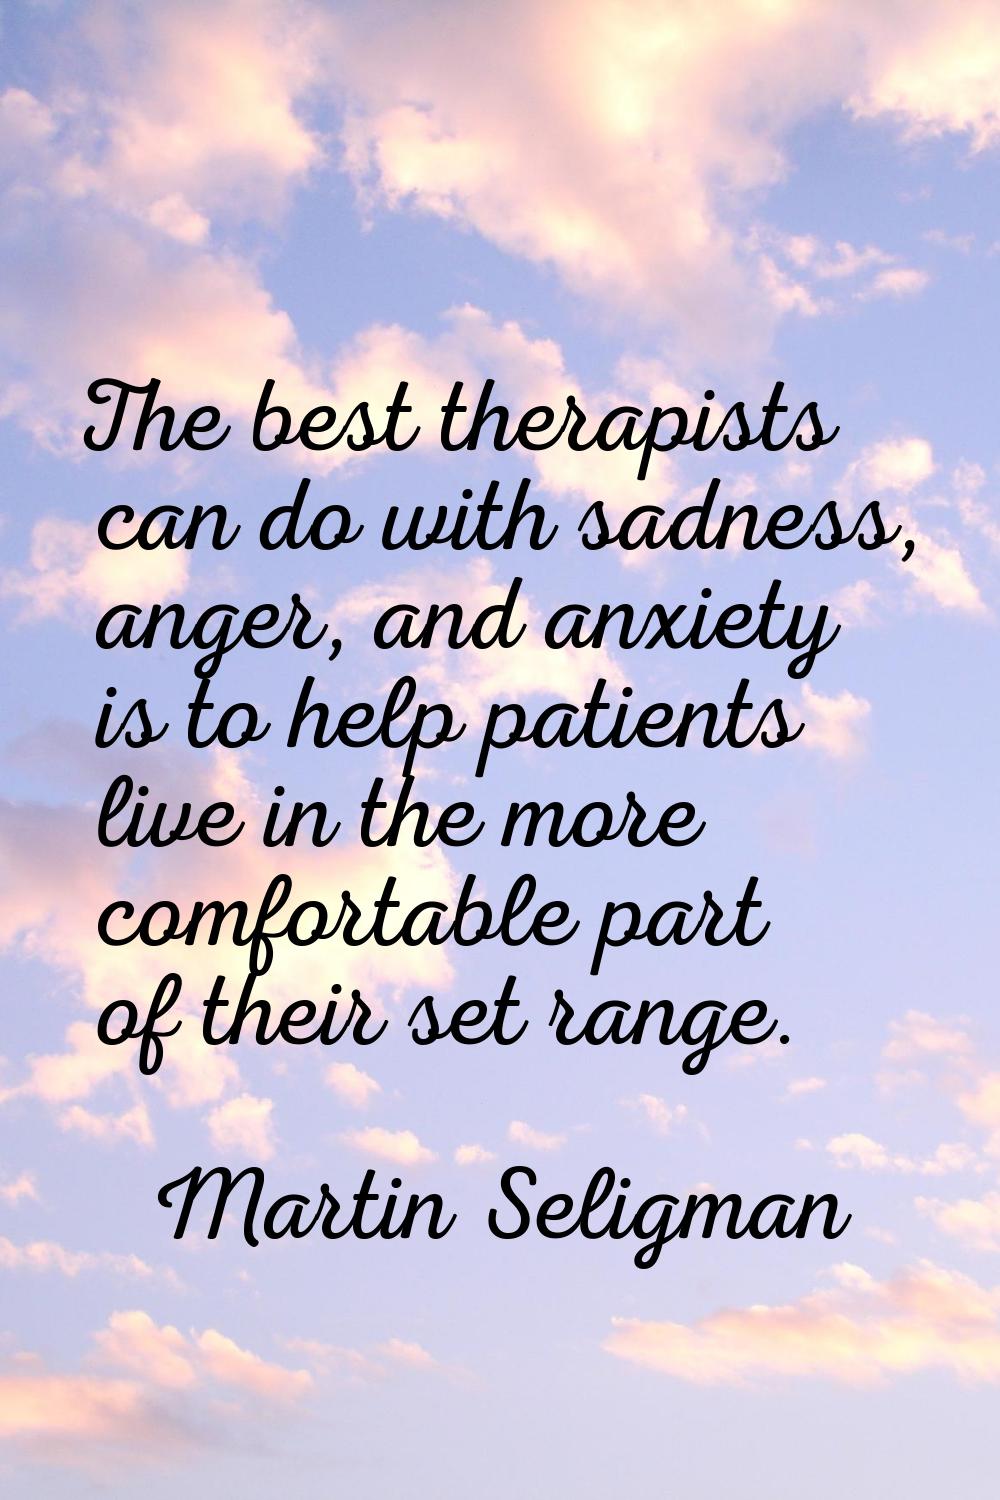 The best therapists can do with sadness, anger, and anxiety is to help patients live in the more co